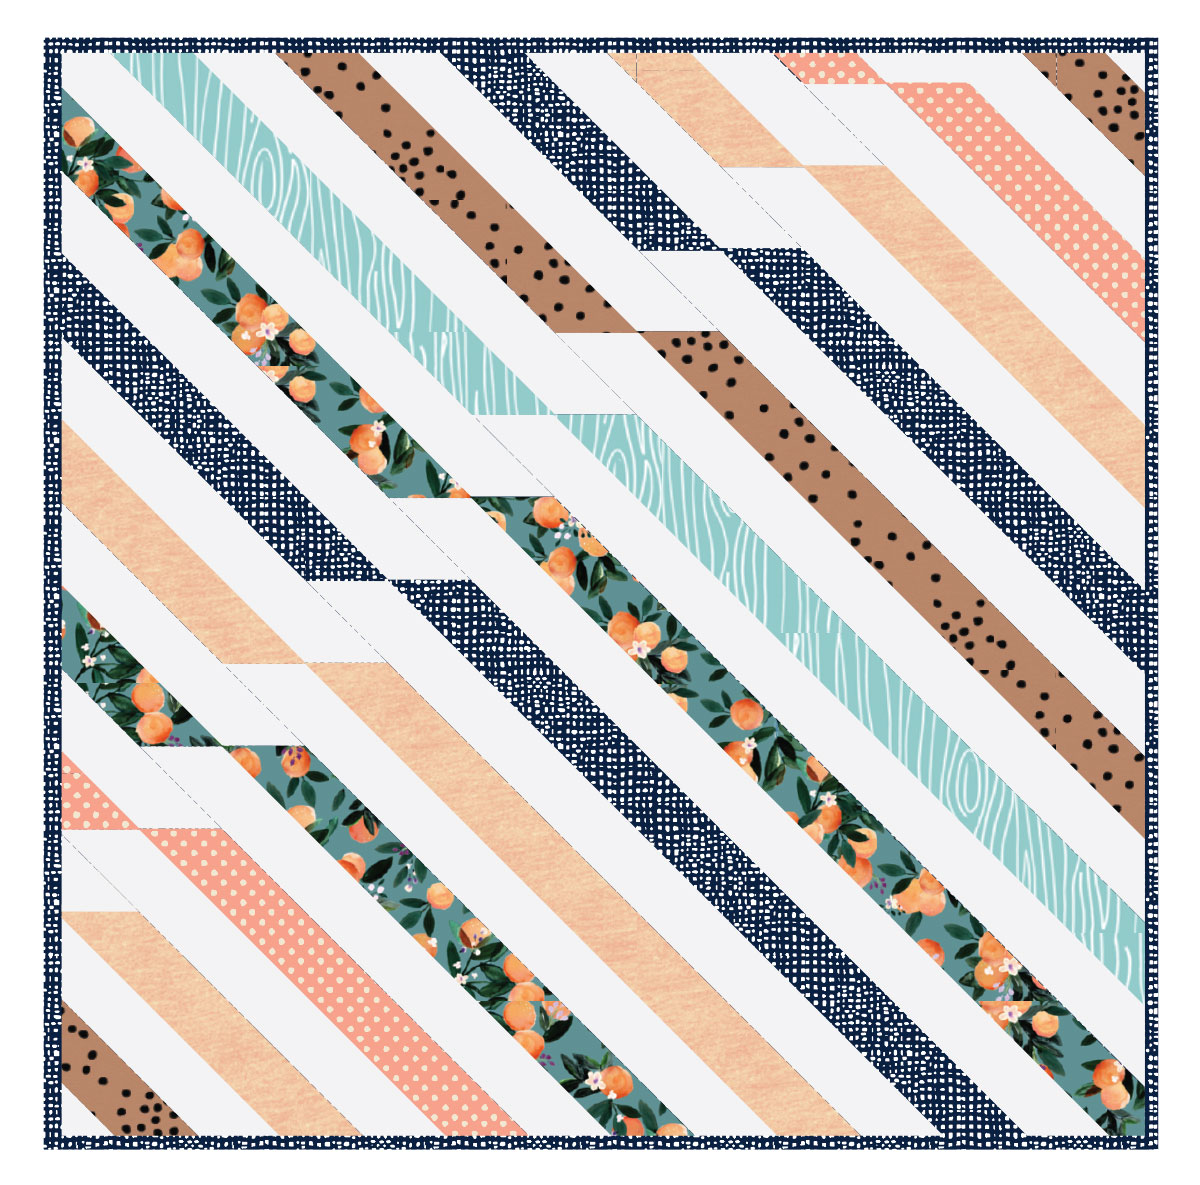 Twisted Ribbons: A Suzy Quilts for Spoonflower Free Quilting Pattern Exclusive | Spoonflower Blog 